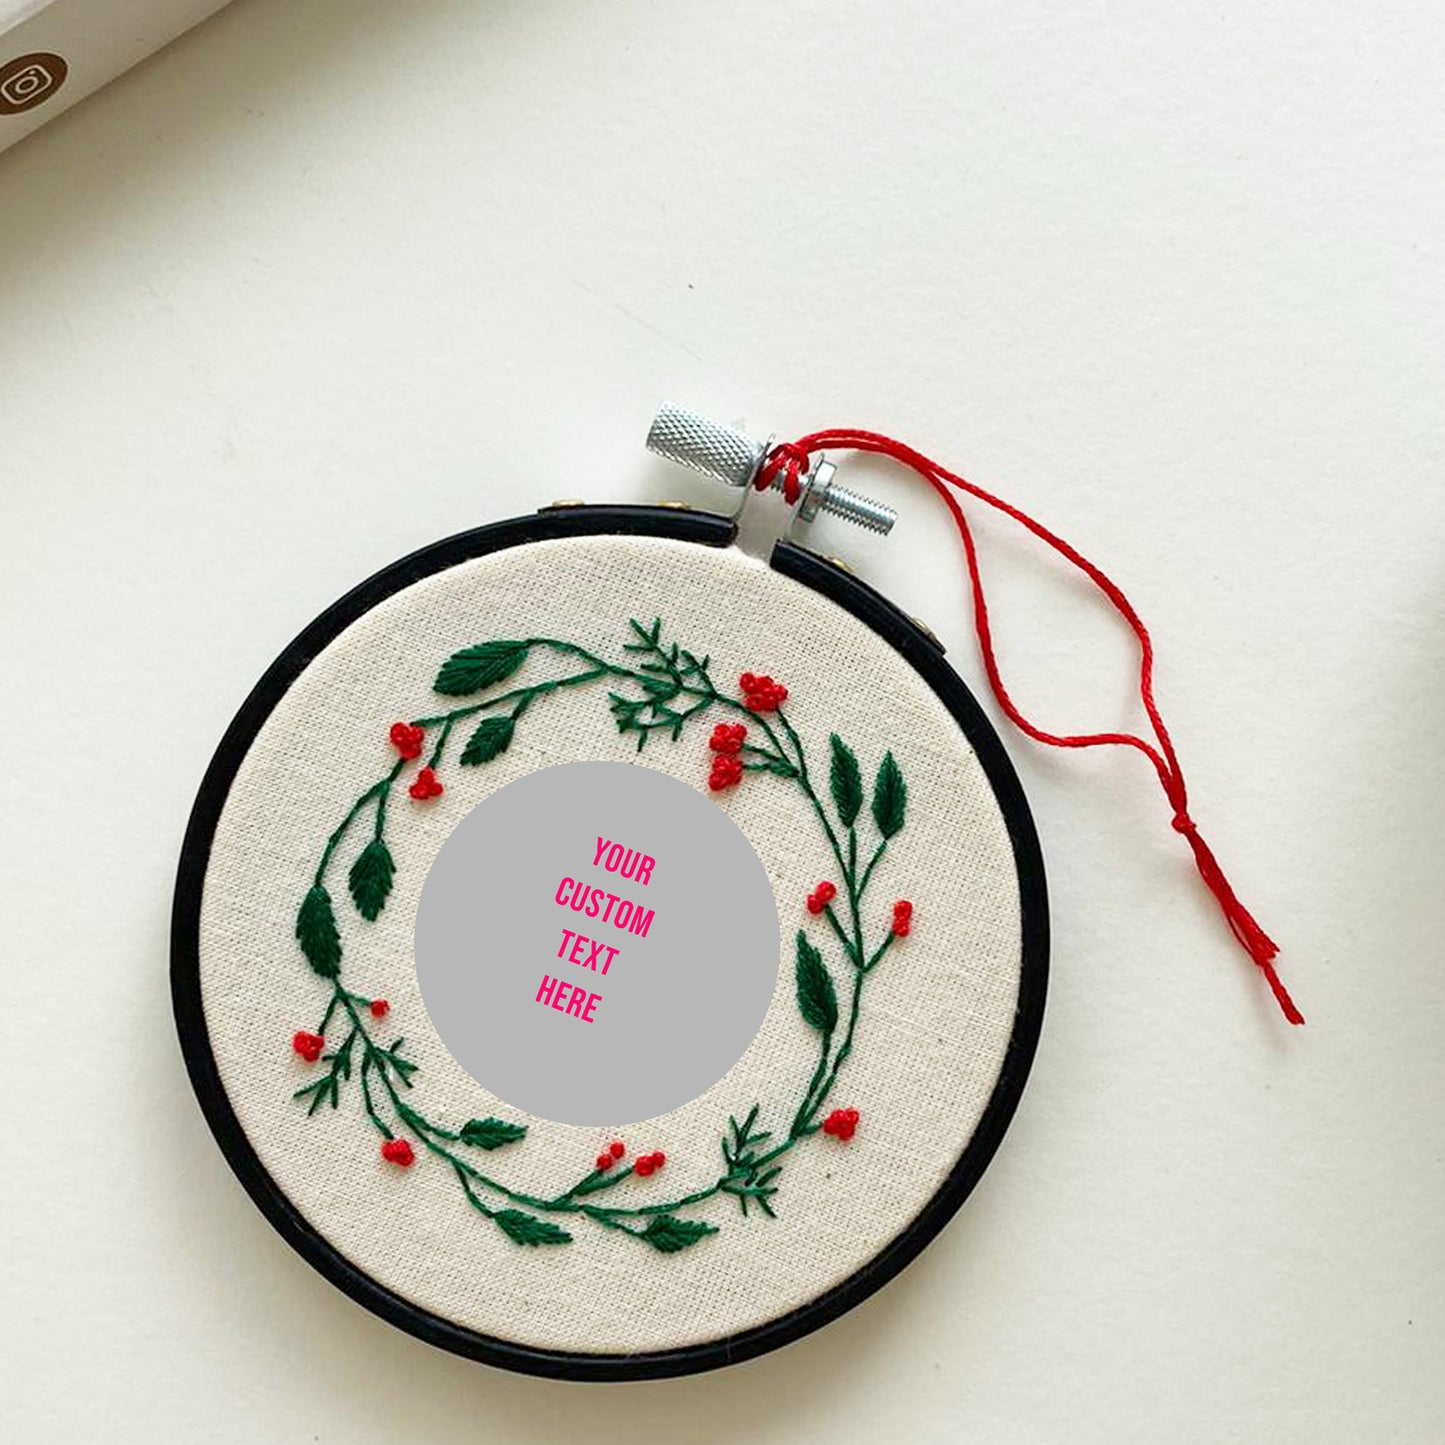 Personalised Christmas Wreath Embroidery Kit